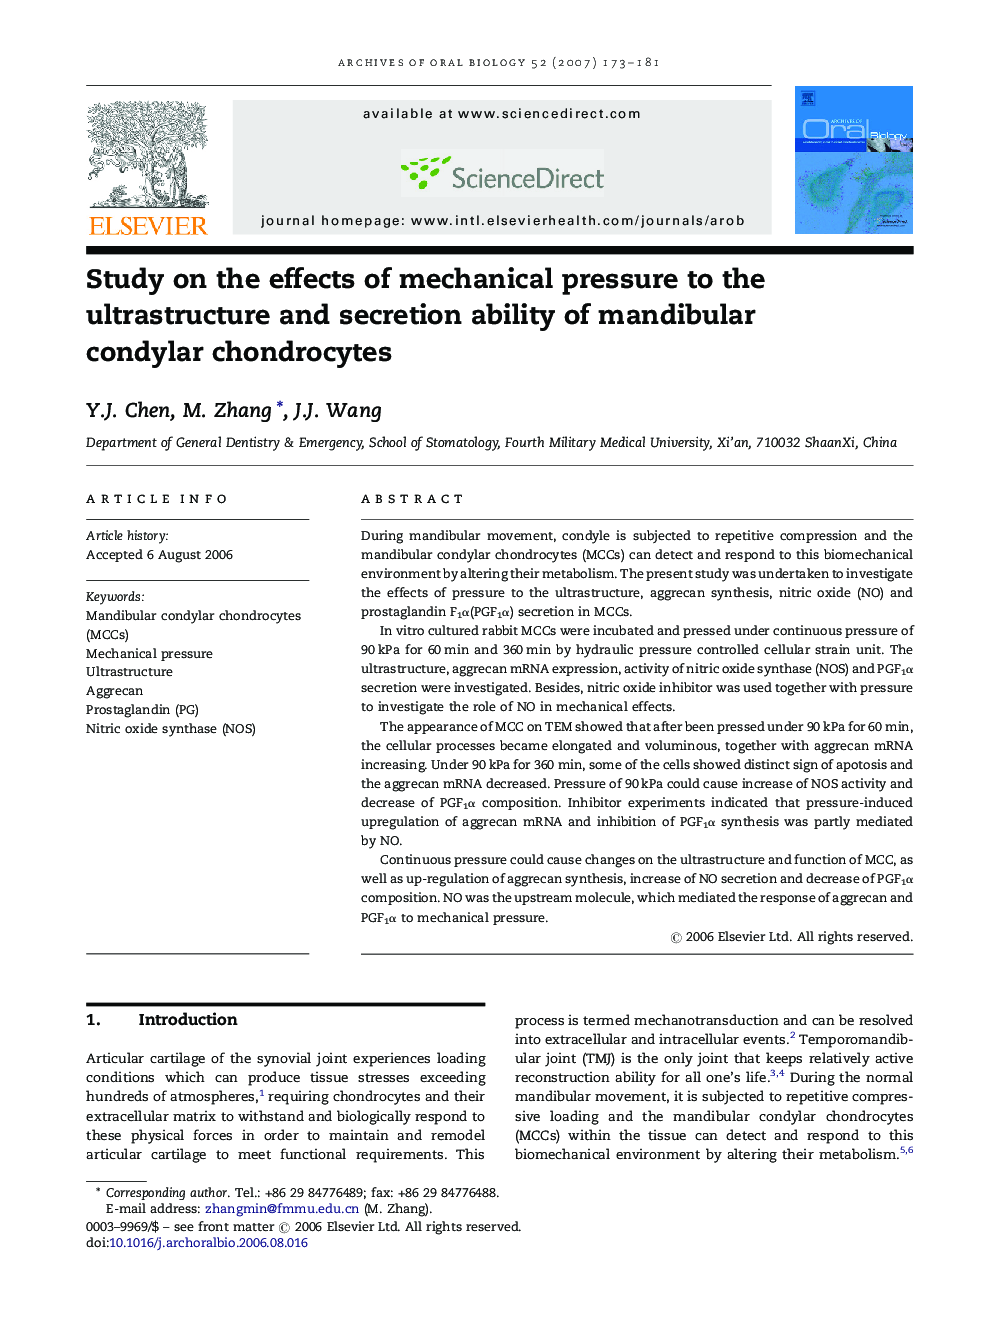 Study on the effects of mechanical pressure to the ultrastructure and secretion ability of mandibular condylar chondrocytes